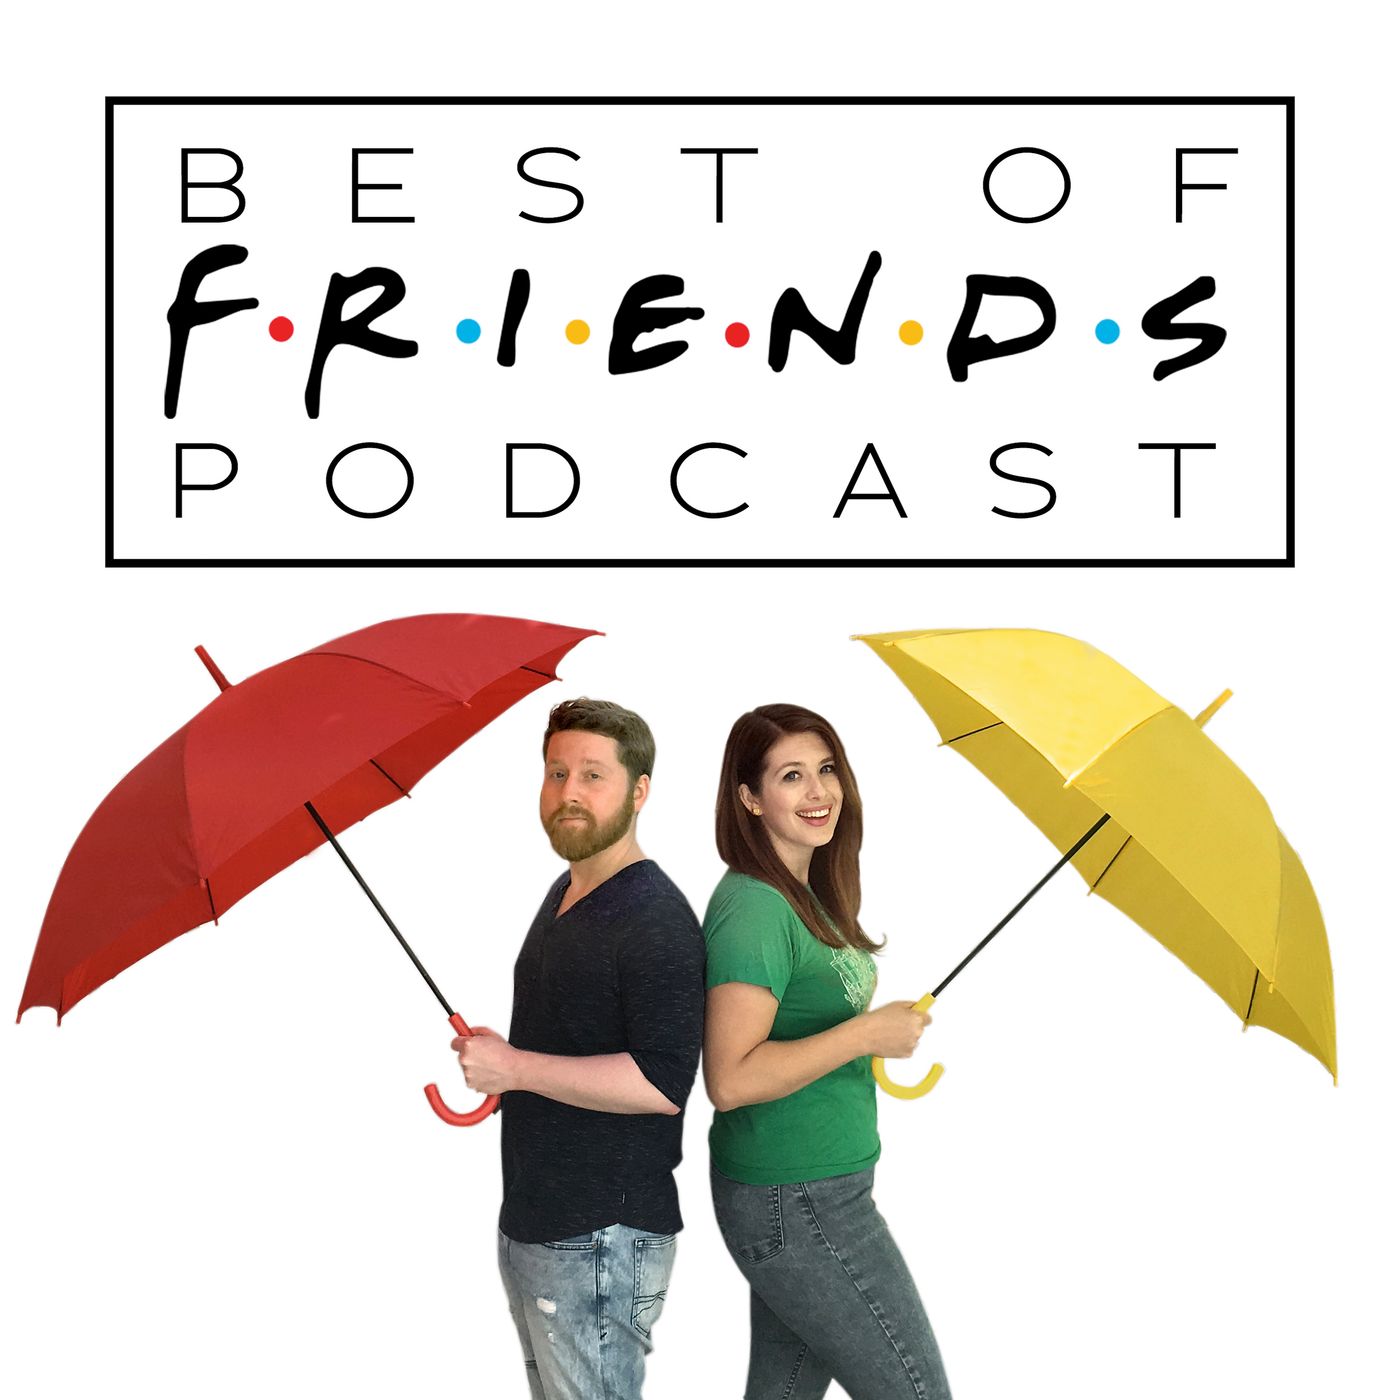 Episode 149: The One With The Last TV Guide